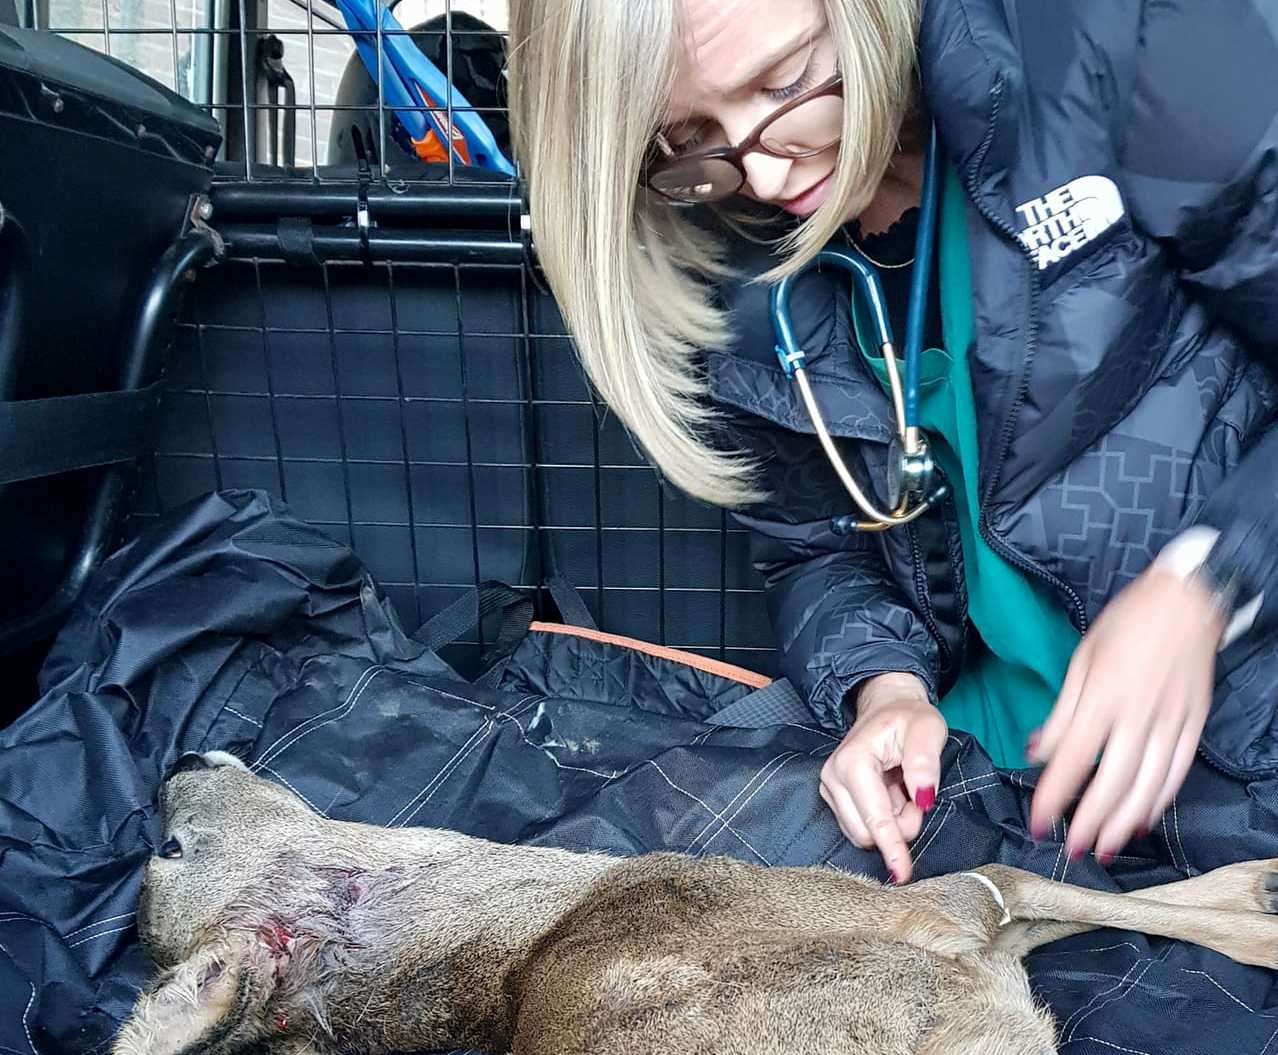 A group of teens sprung into action in an attempt to save an injured deer at a park in Sevenoaks